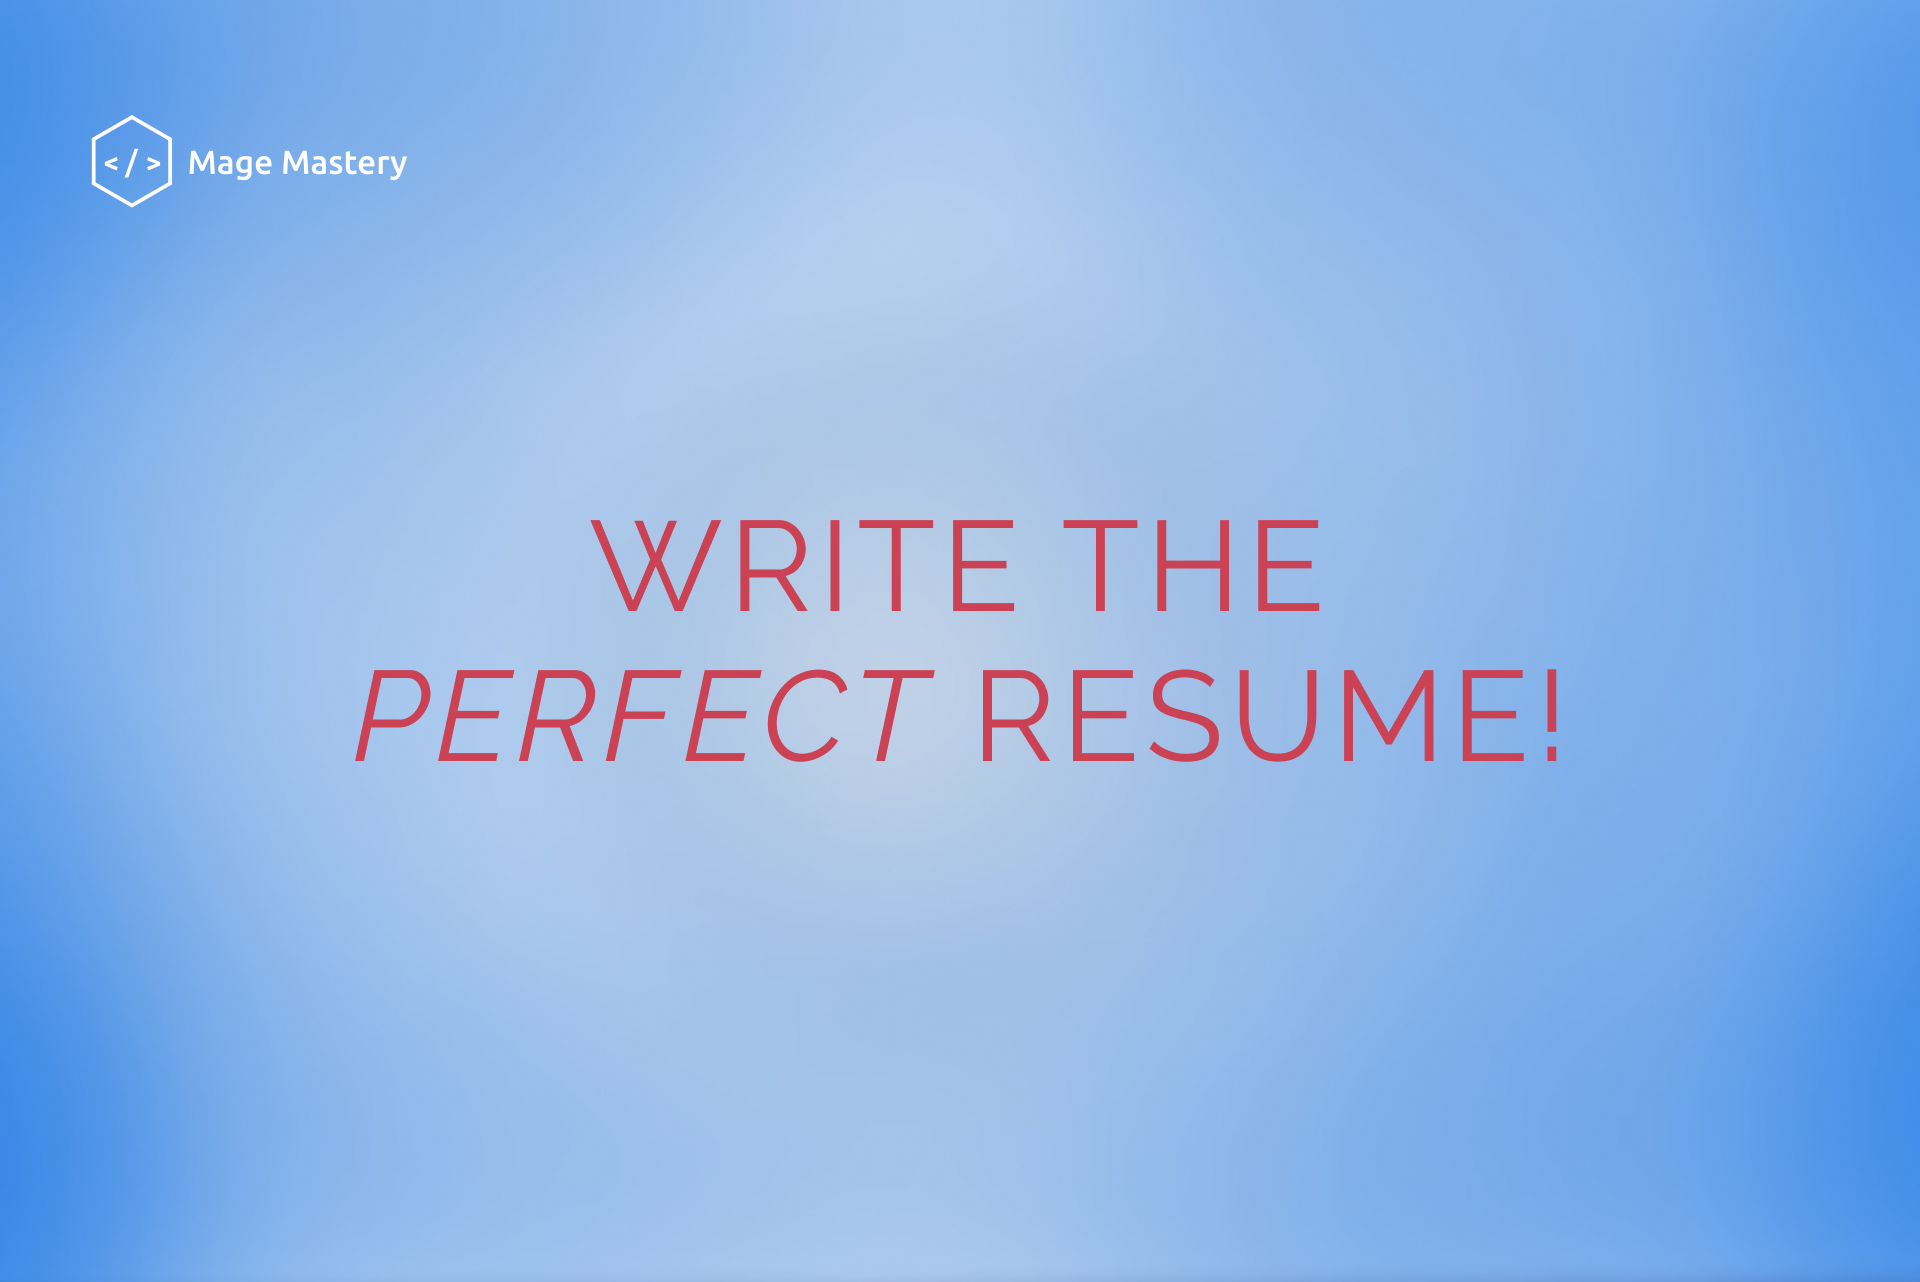 How to write a resume: 7 tips for getting a new job